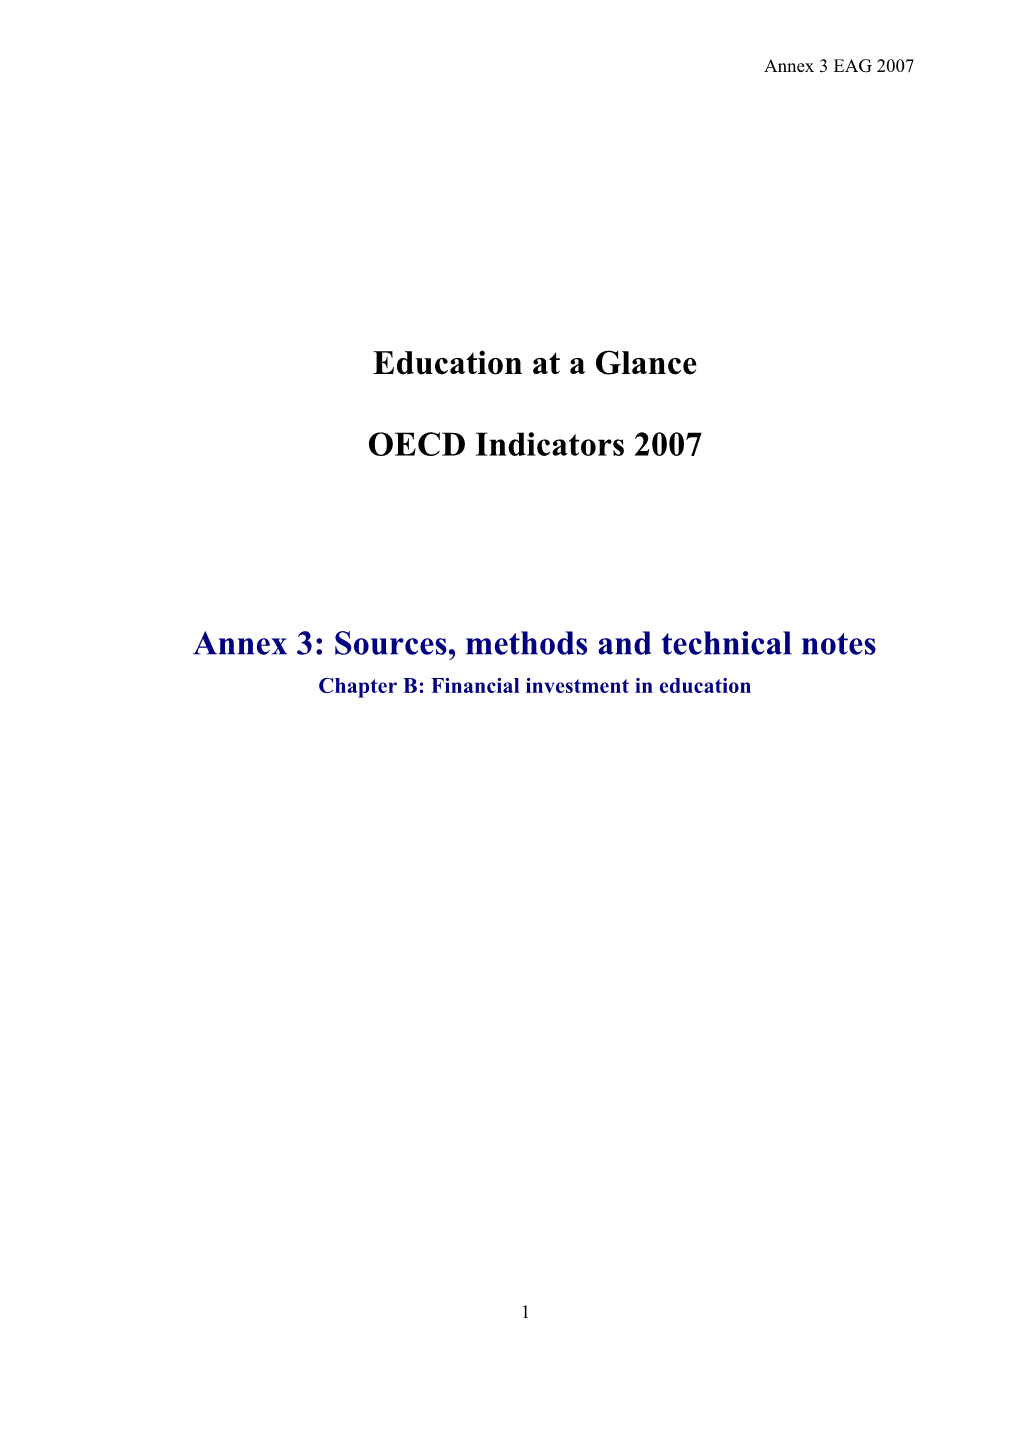 Annex 3: Sources, Methods and Technical Notes s1